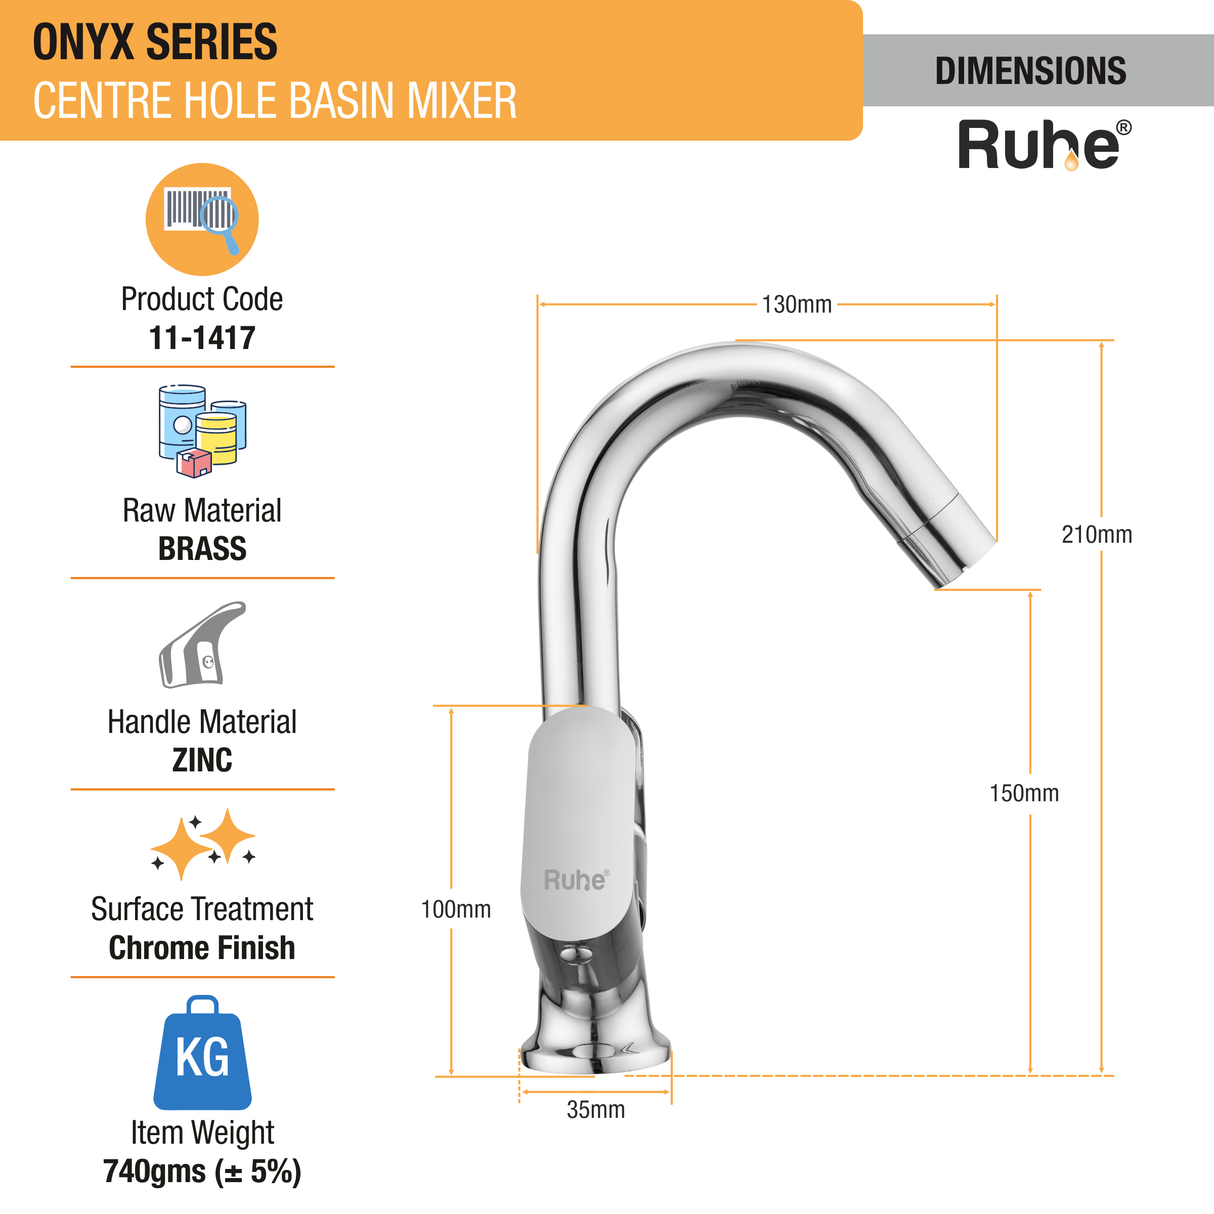 Onyx Centre Hole Basin Mixer with Small (12 inches) Round Swivel Spout Faucet dimensions and size